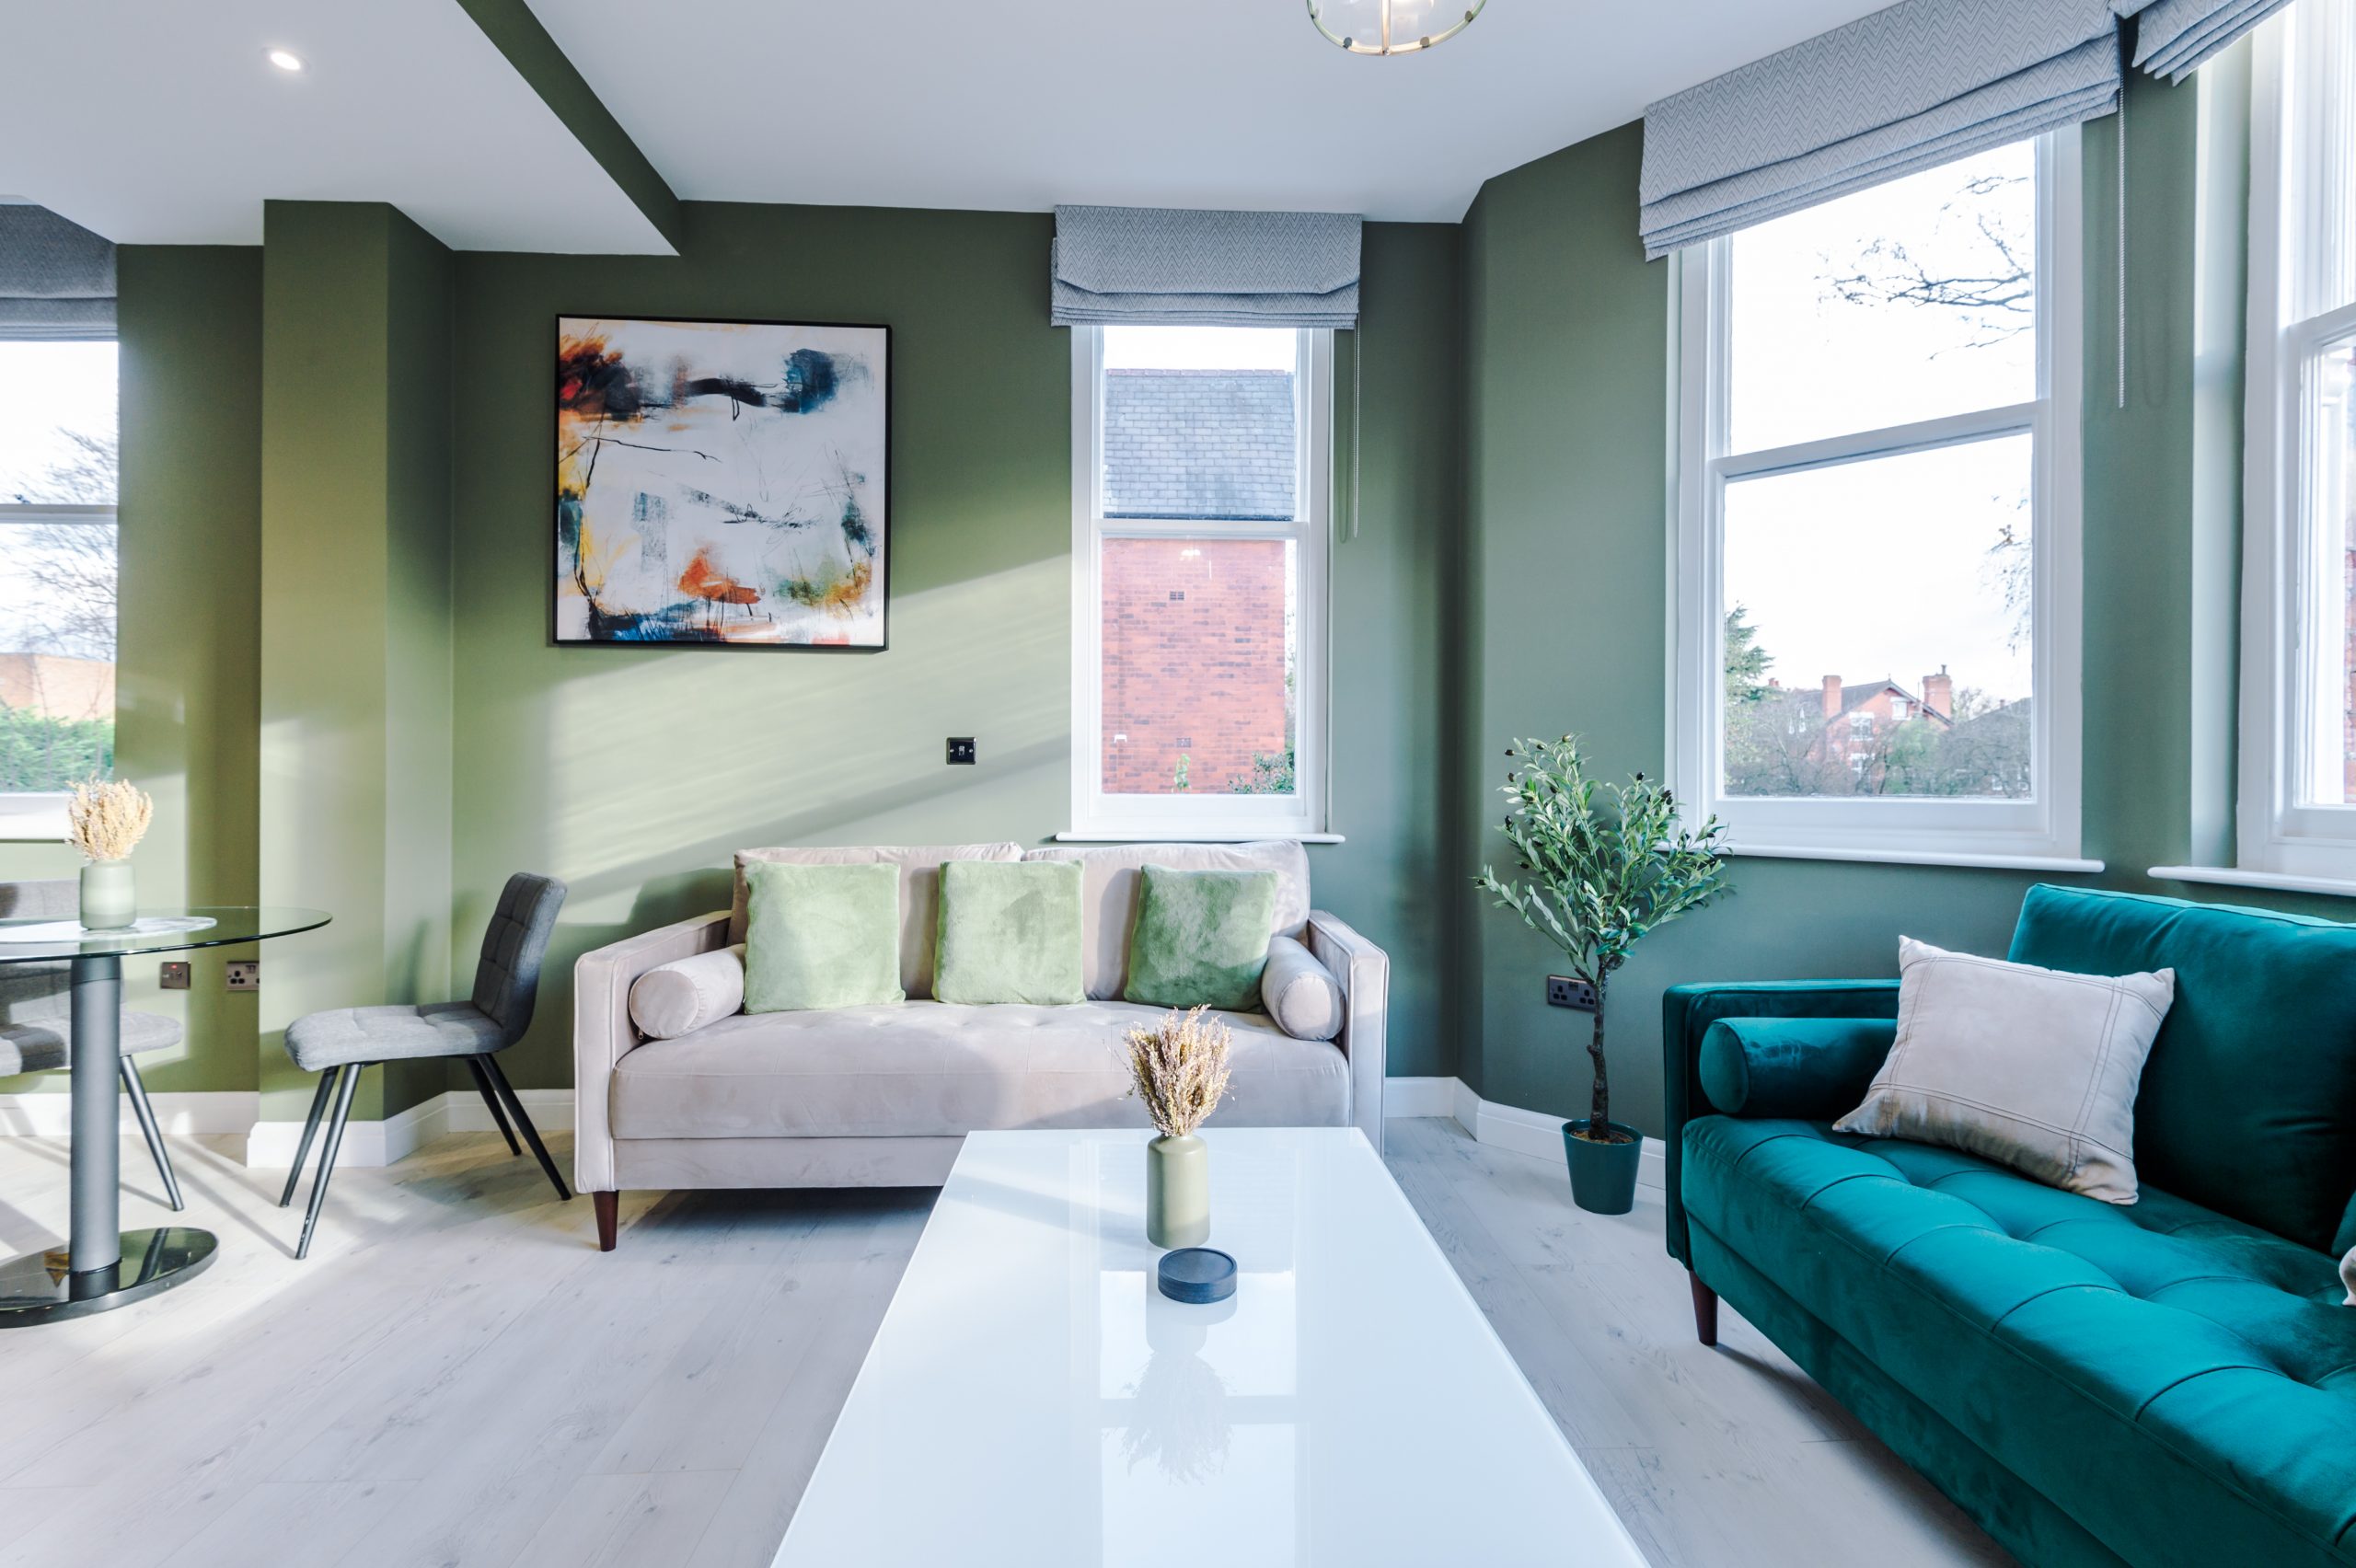 Serviced Apartments vs Airbnb: What You Need to Know Before Booking